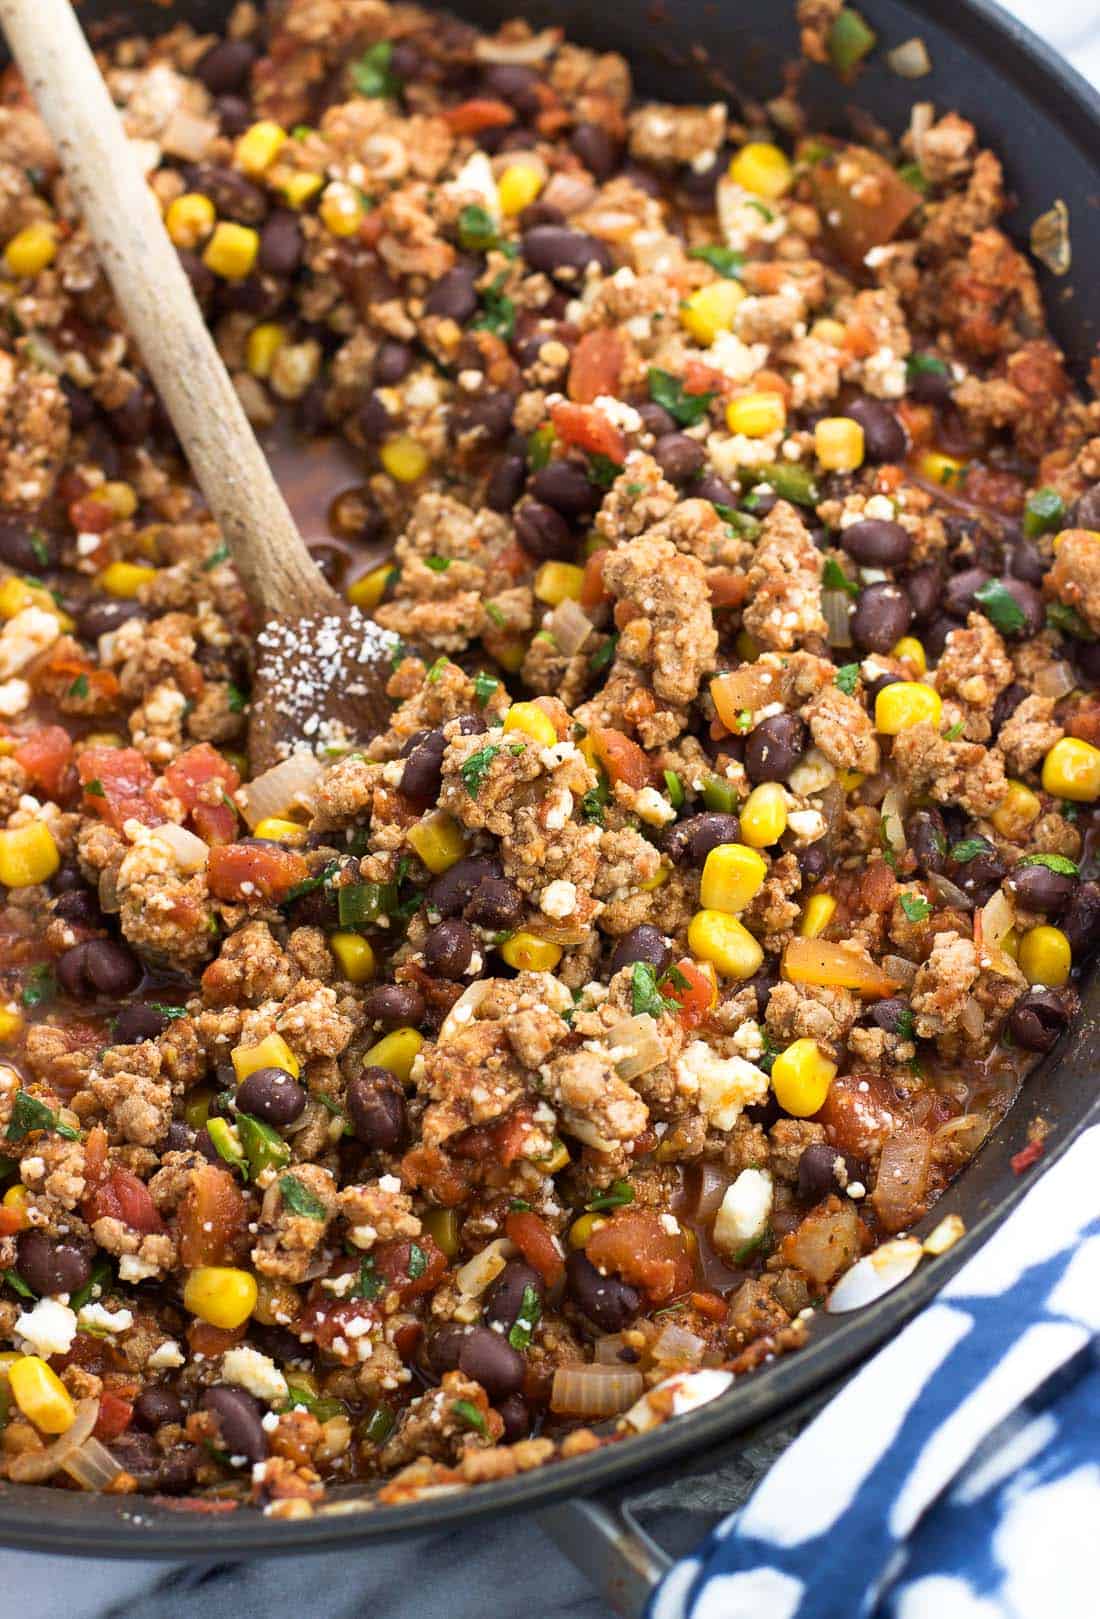 Turkey, black beans, corn, salsa, cilantro, and cotija cheese stirred together in a pan with a wooden spoon